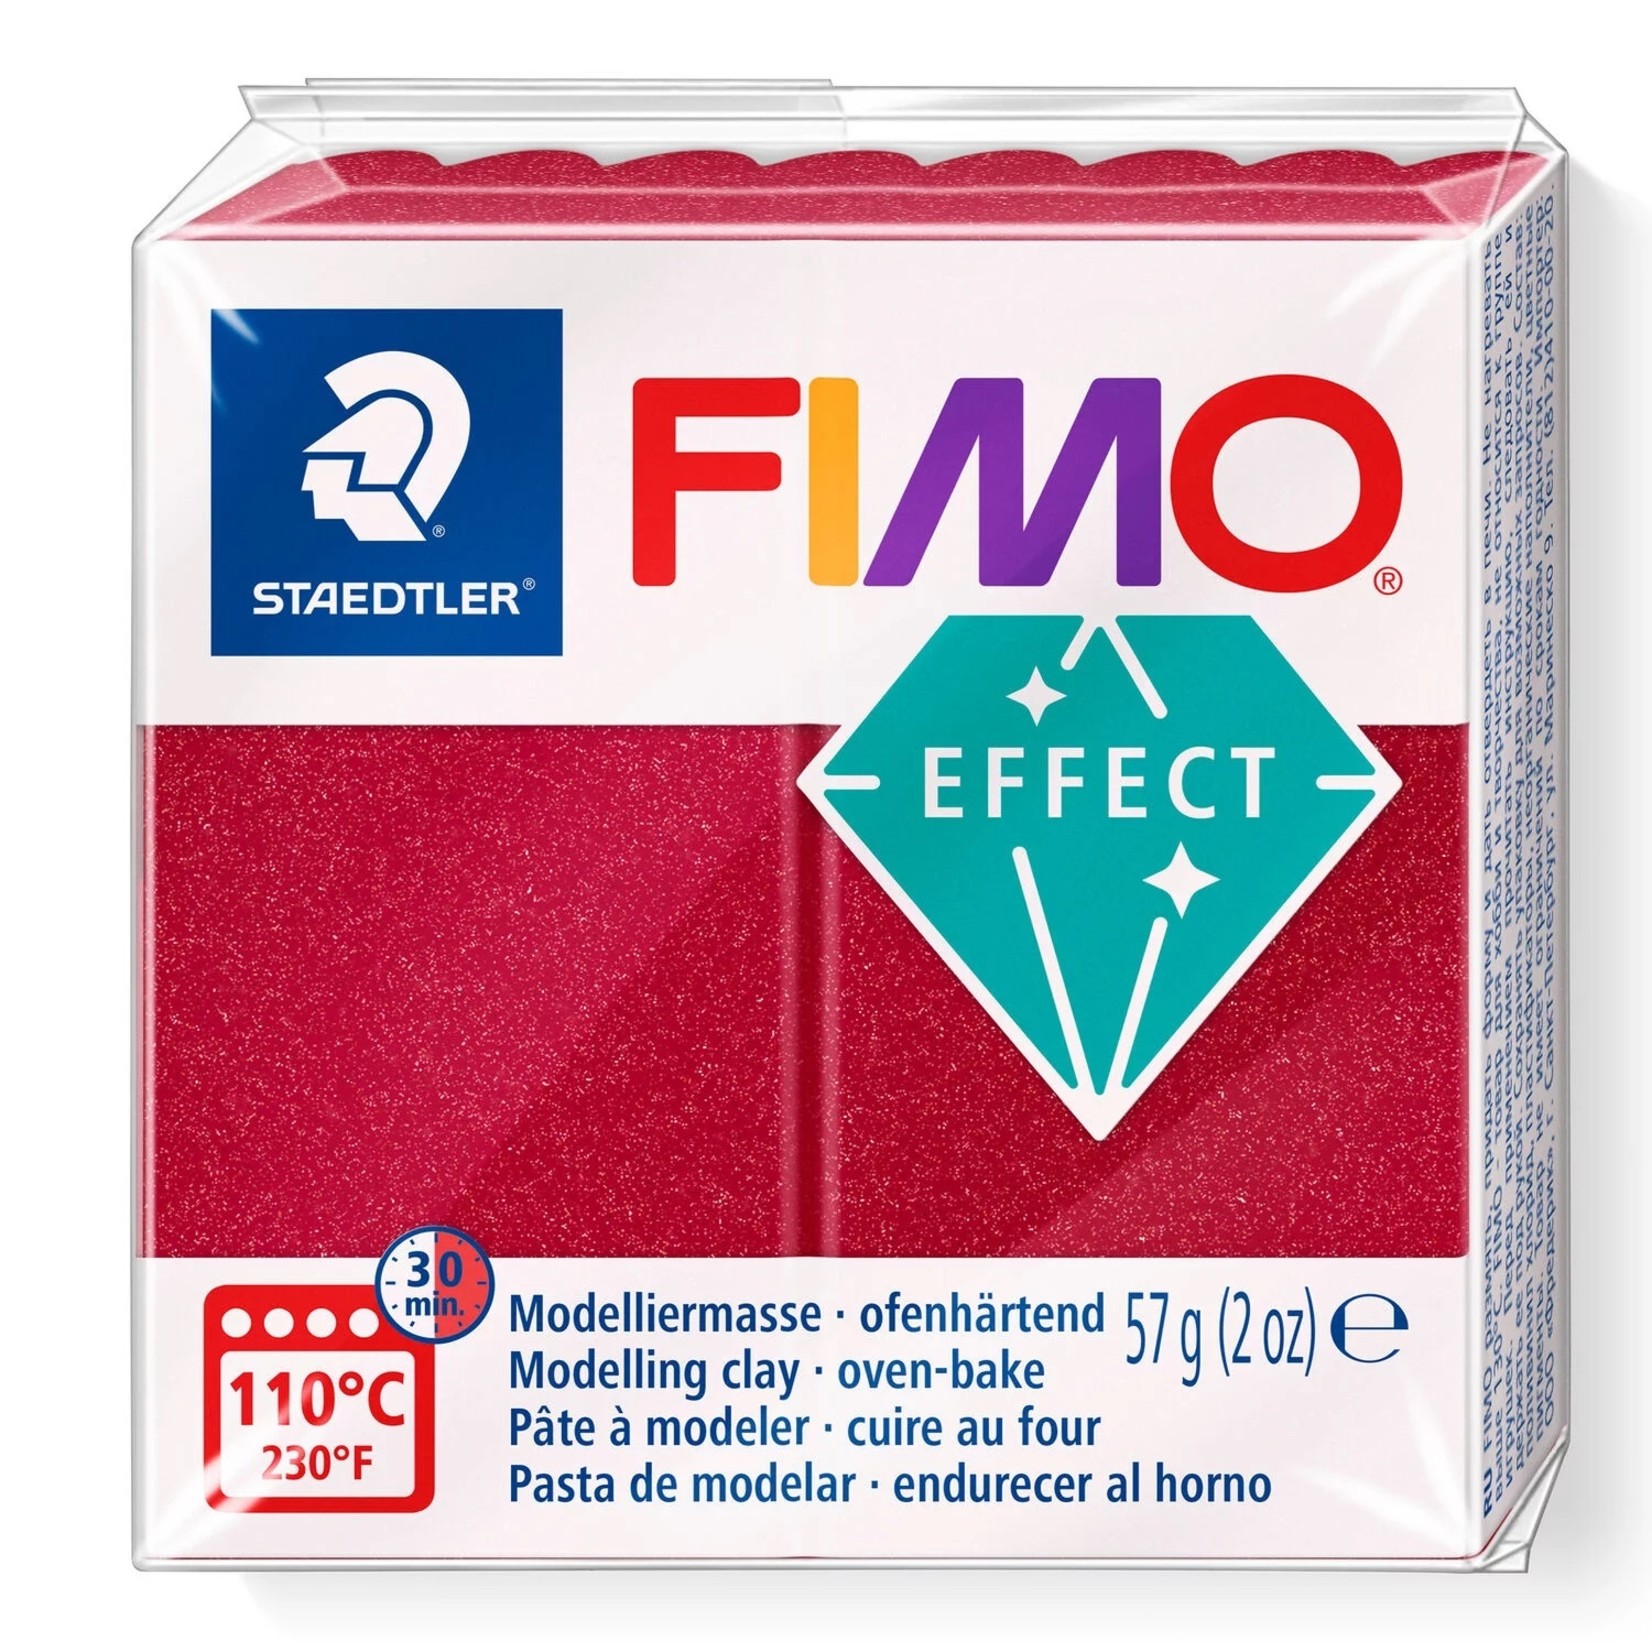 STAEDTLER FIMO EFFECT METALLIC 28 RUBY RED (TBD)